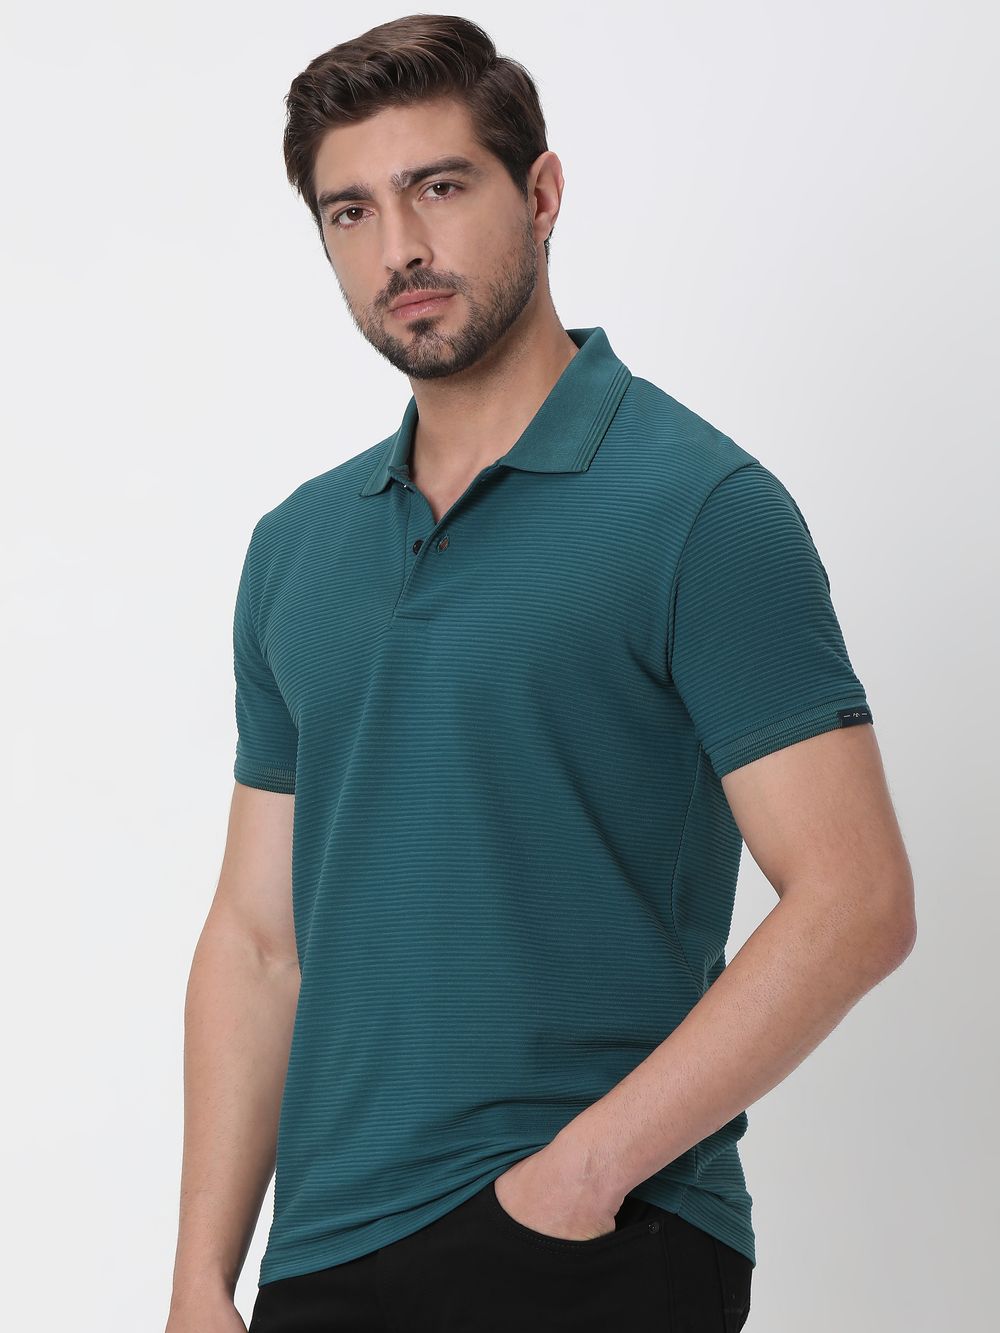 Teal Textured Plain Slim Fit Polo